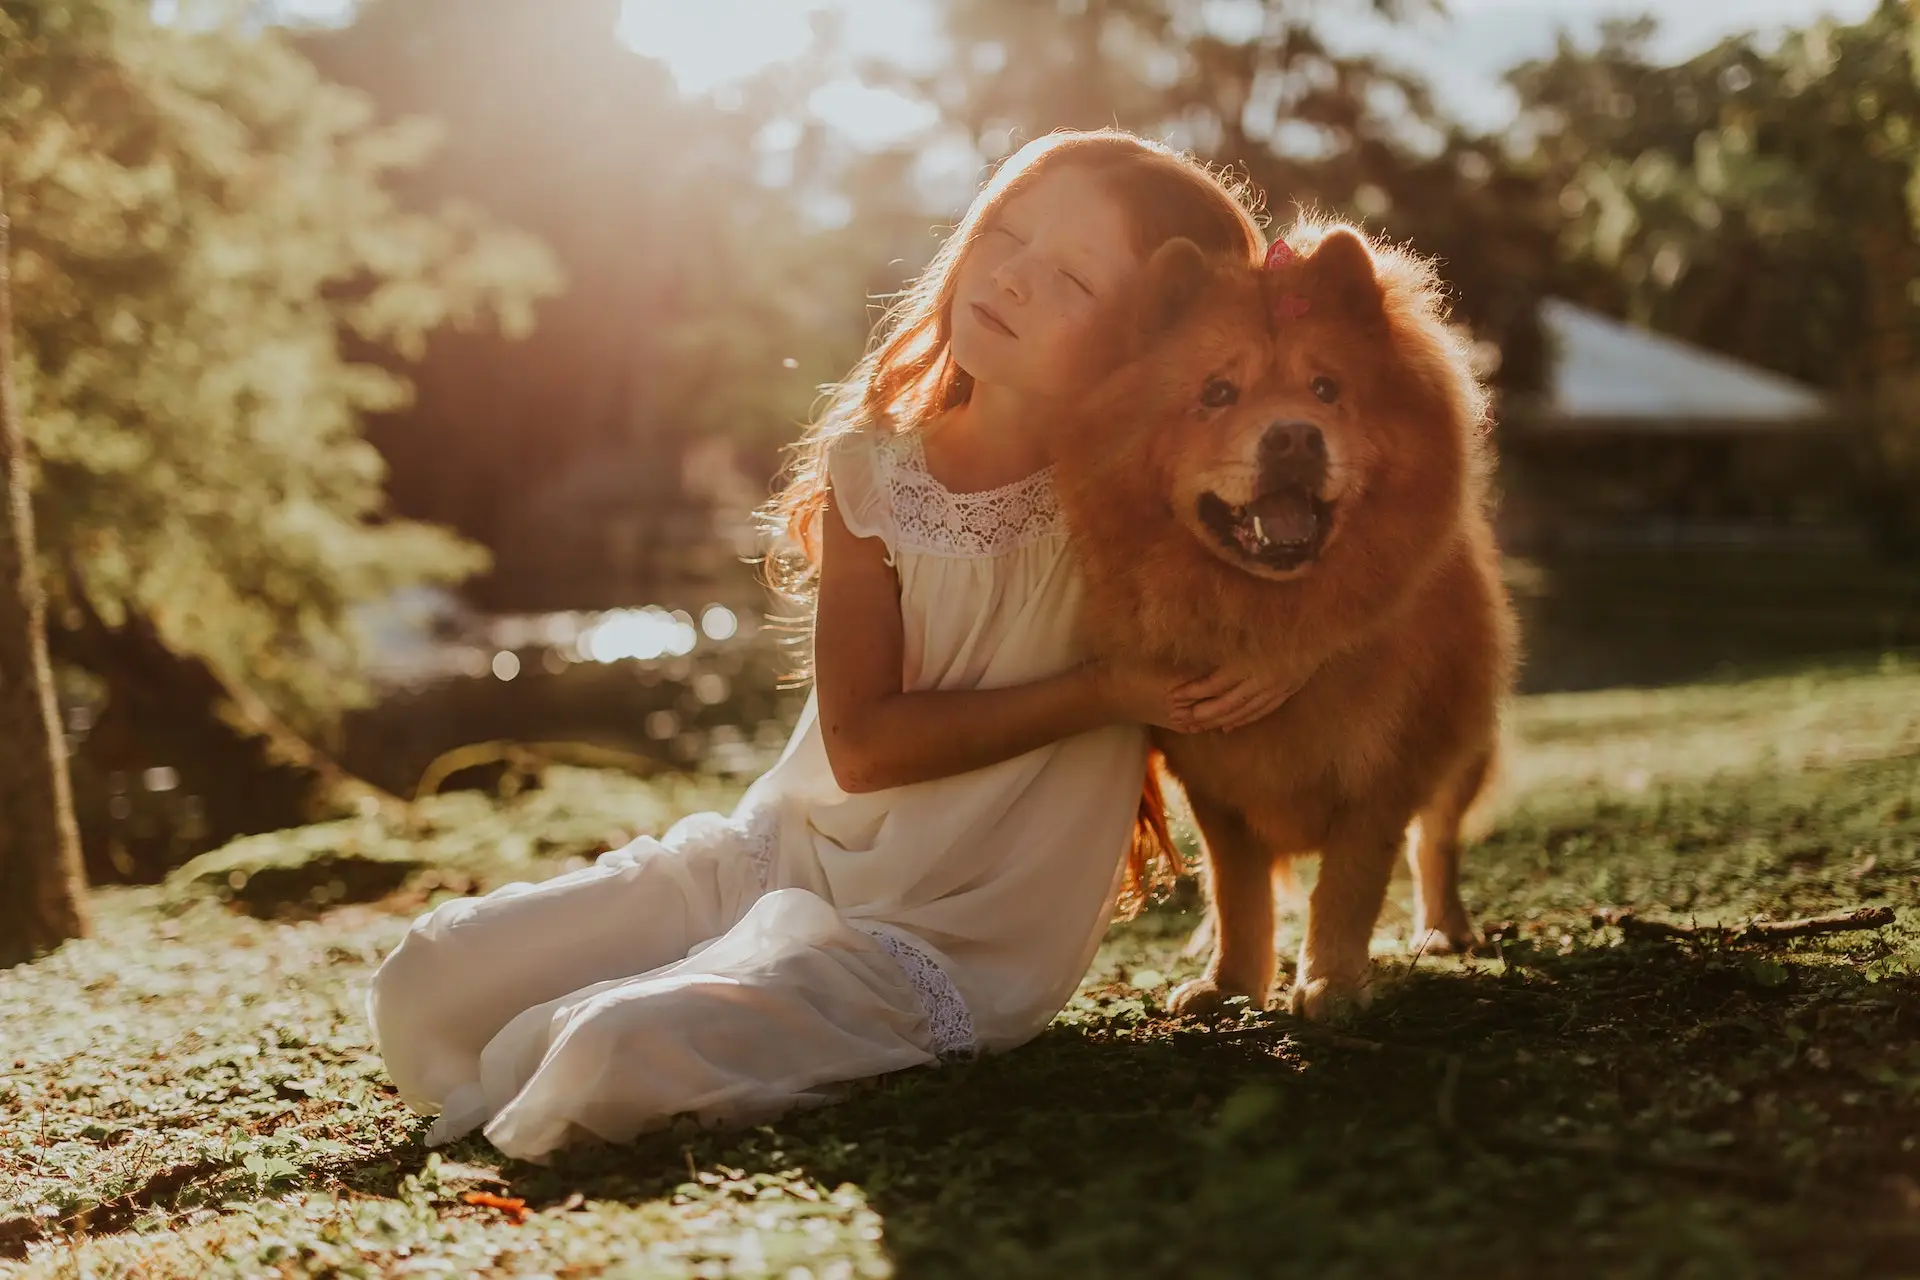 Young girl dressed in white with tan dog on grass in sunlight 